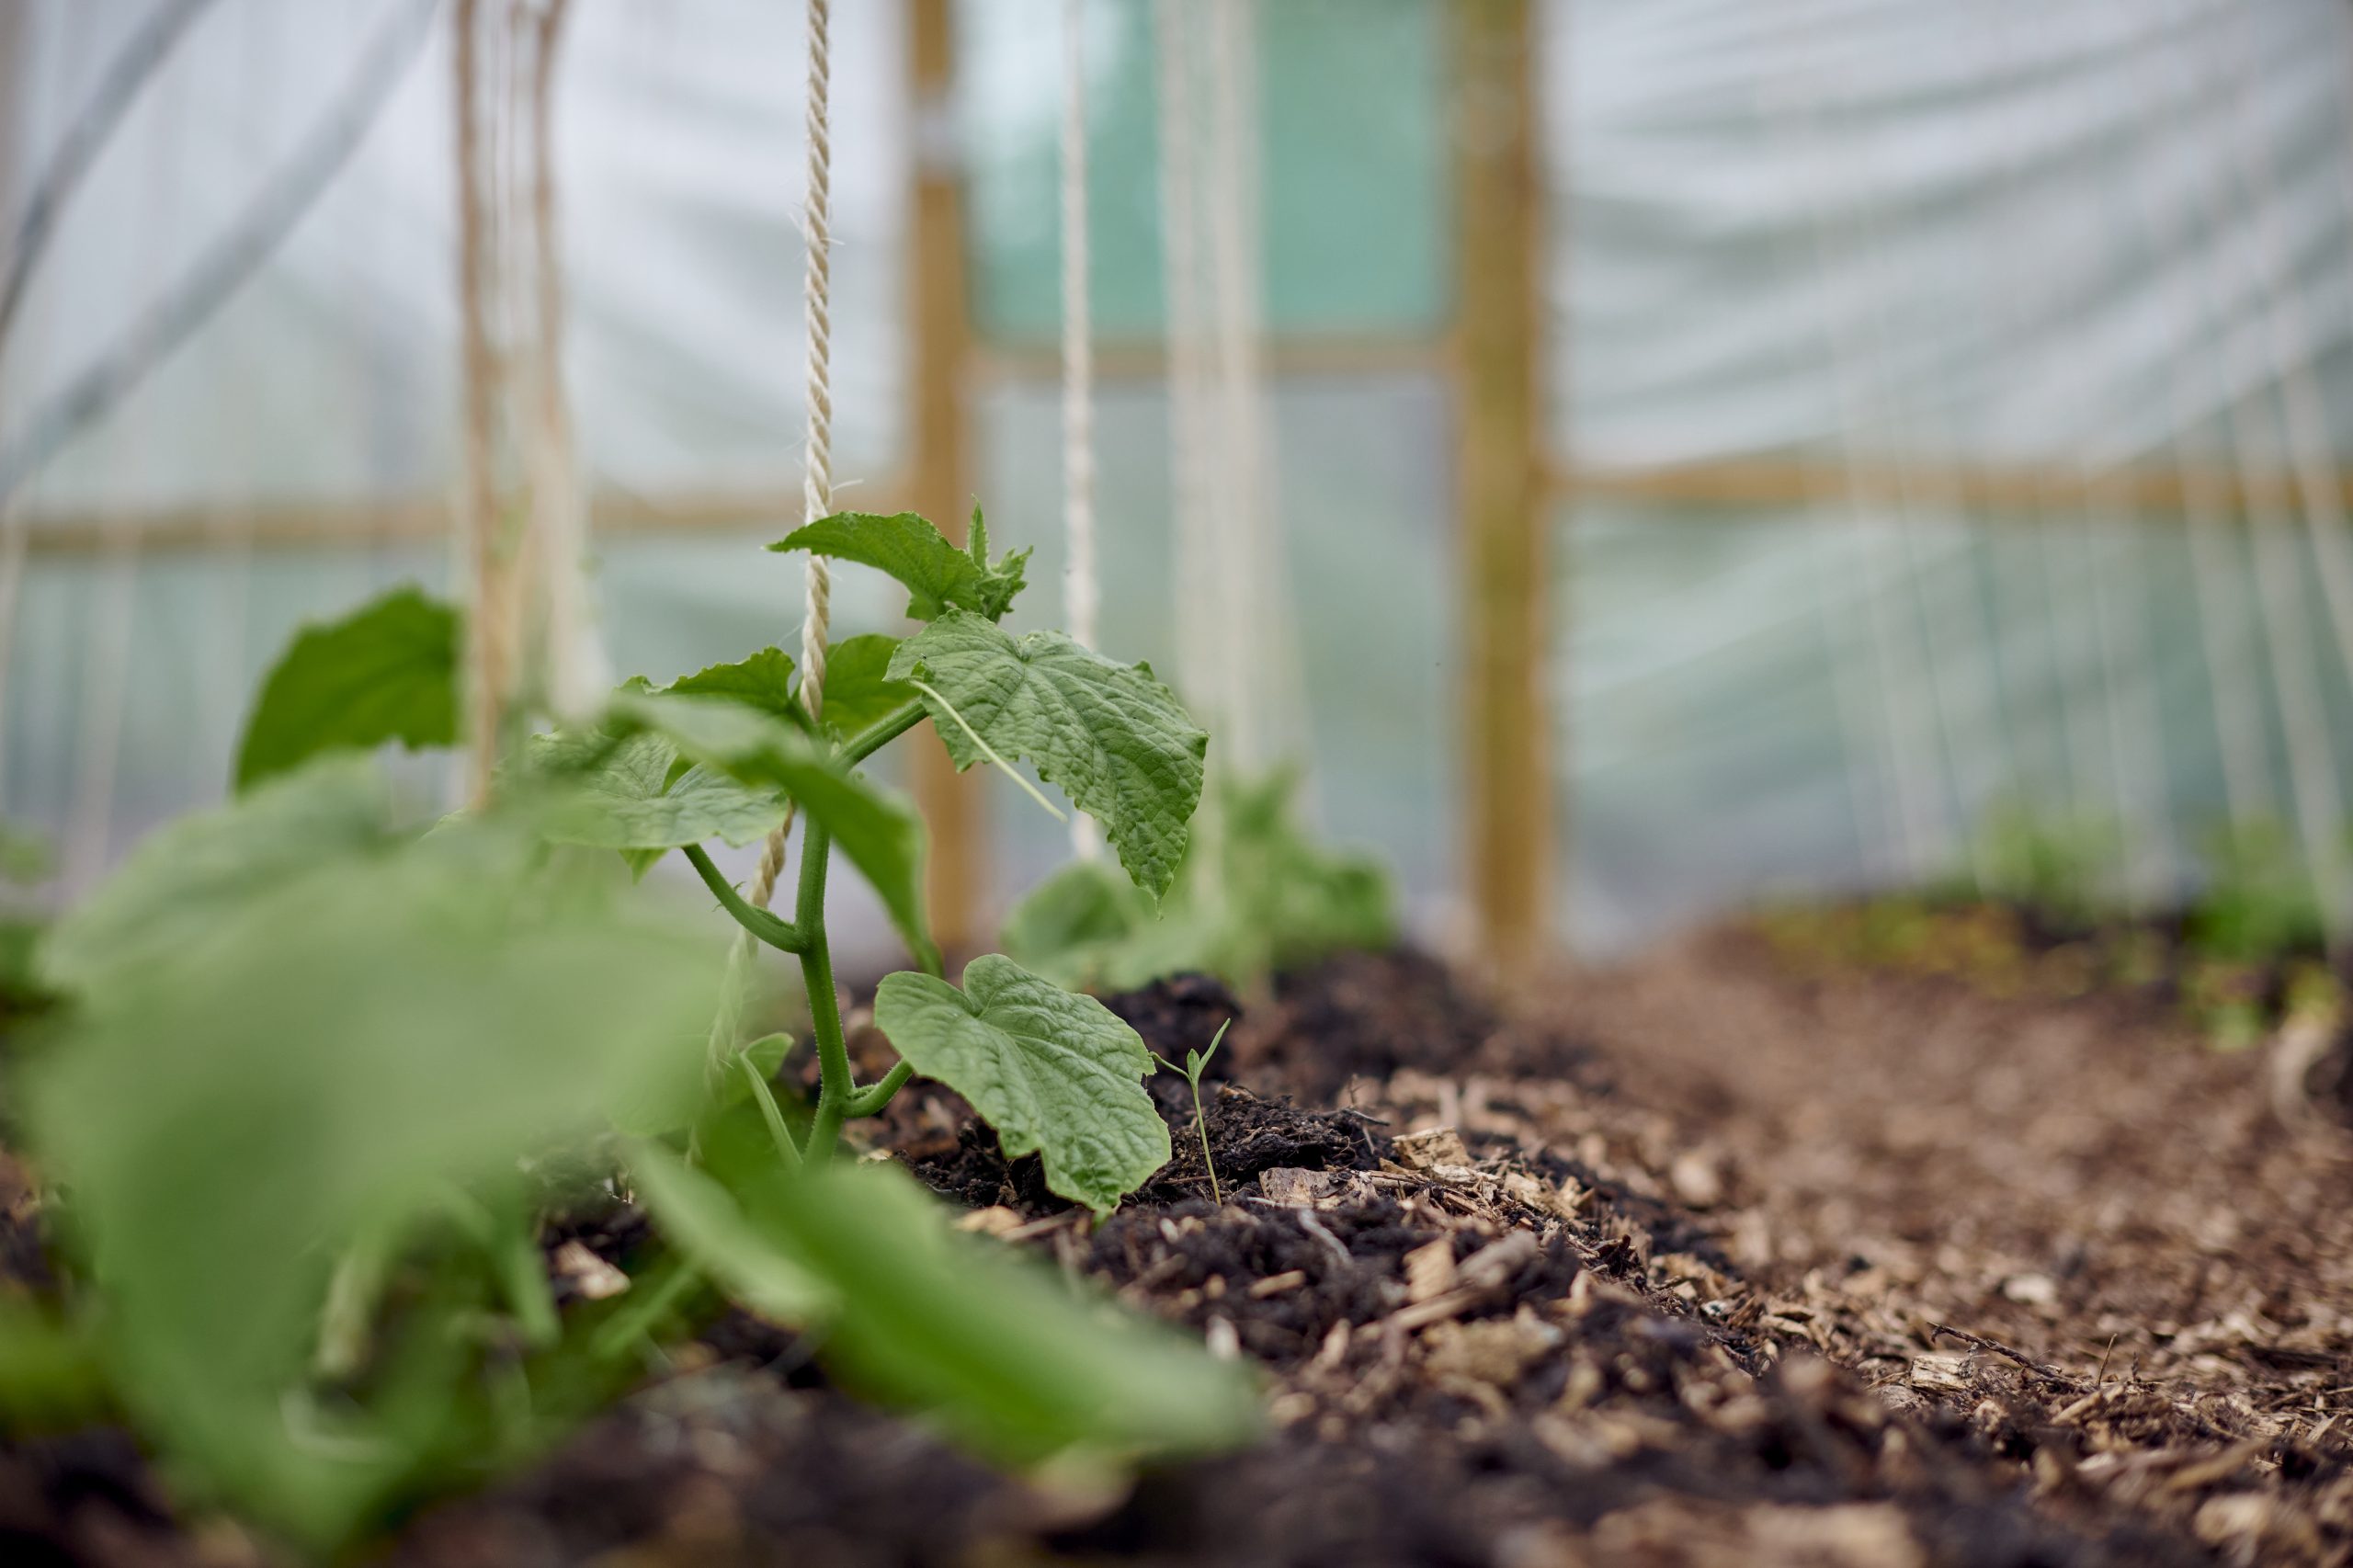 Shoots and polytunnel